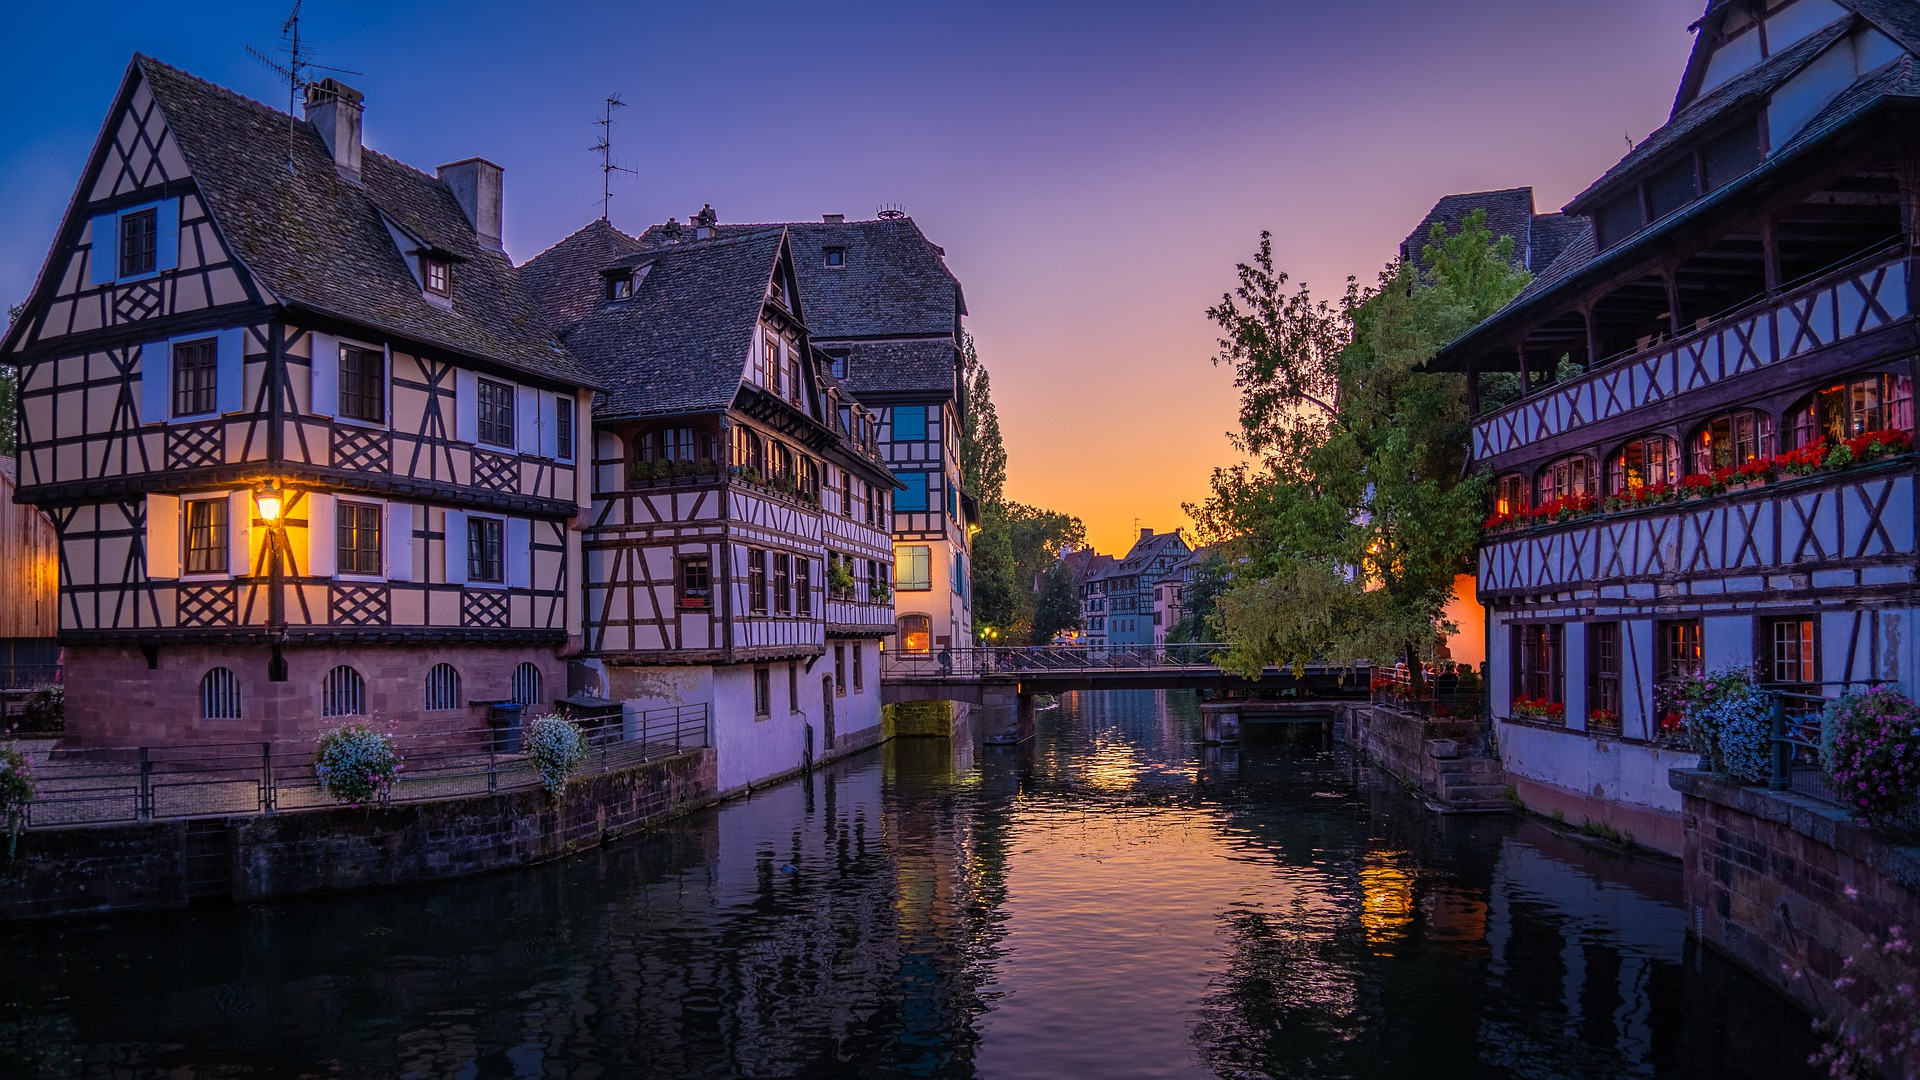 8 FRENCH COUNTRYSIDE TOWNS YOU’LL FALL IN LOVE WITH